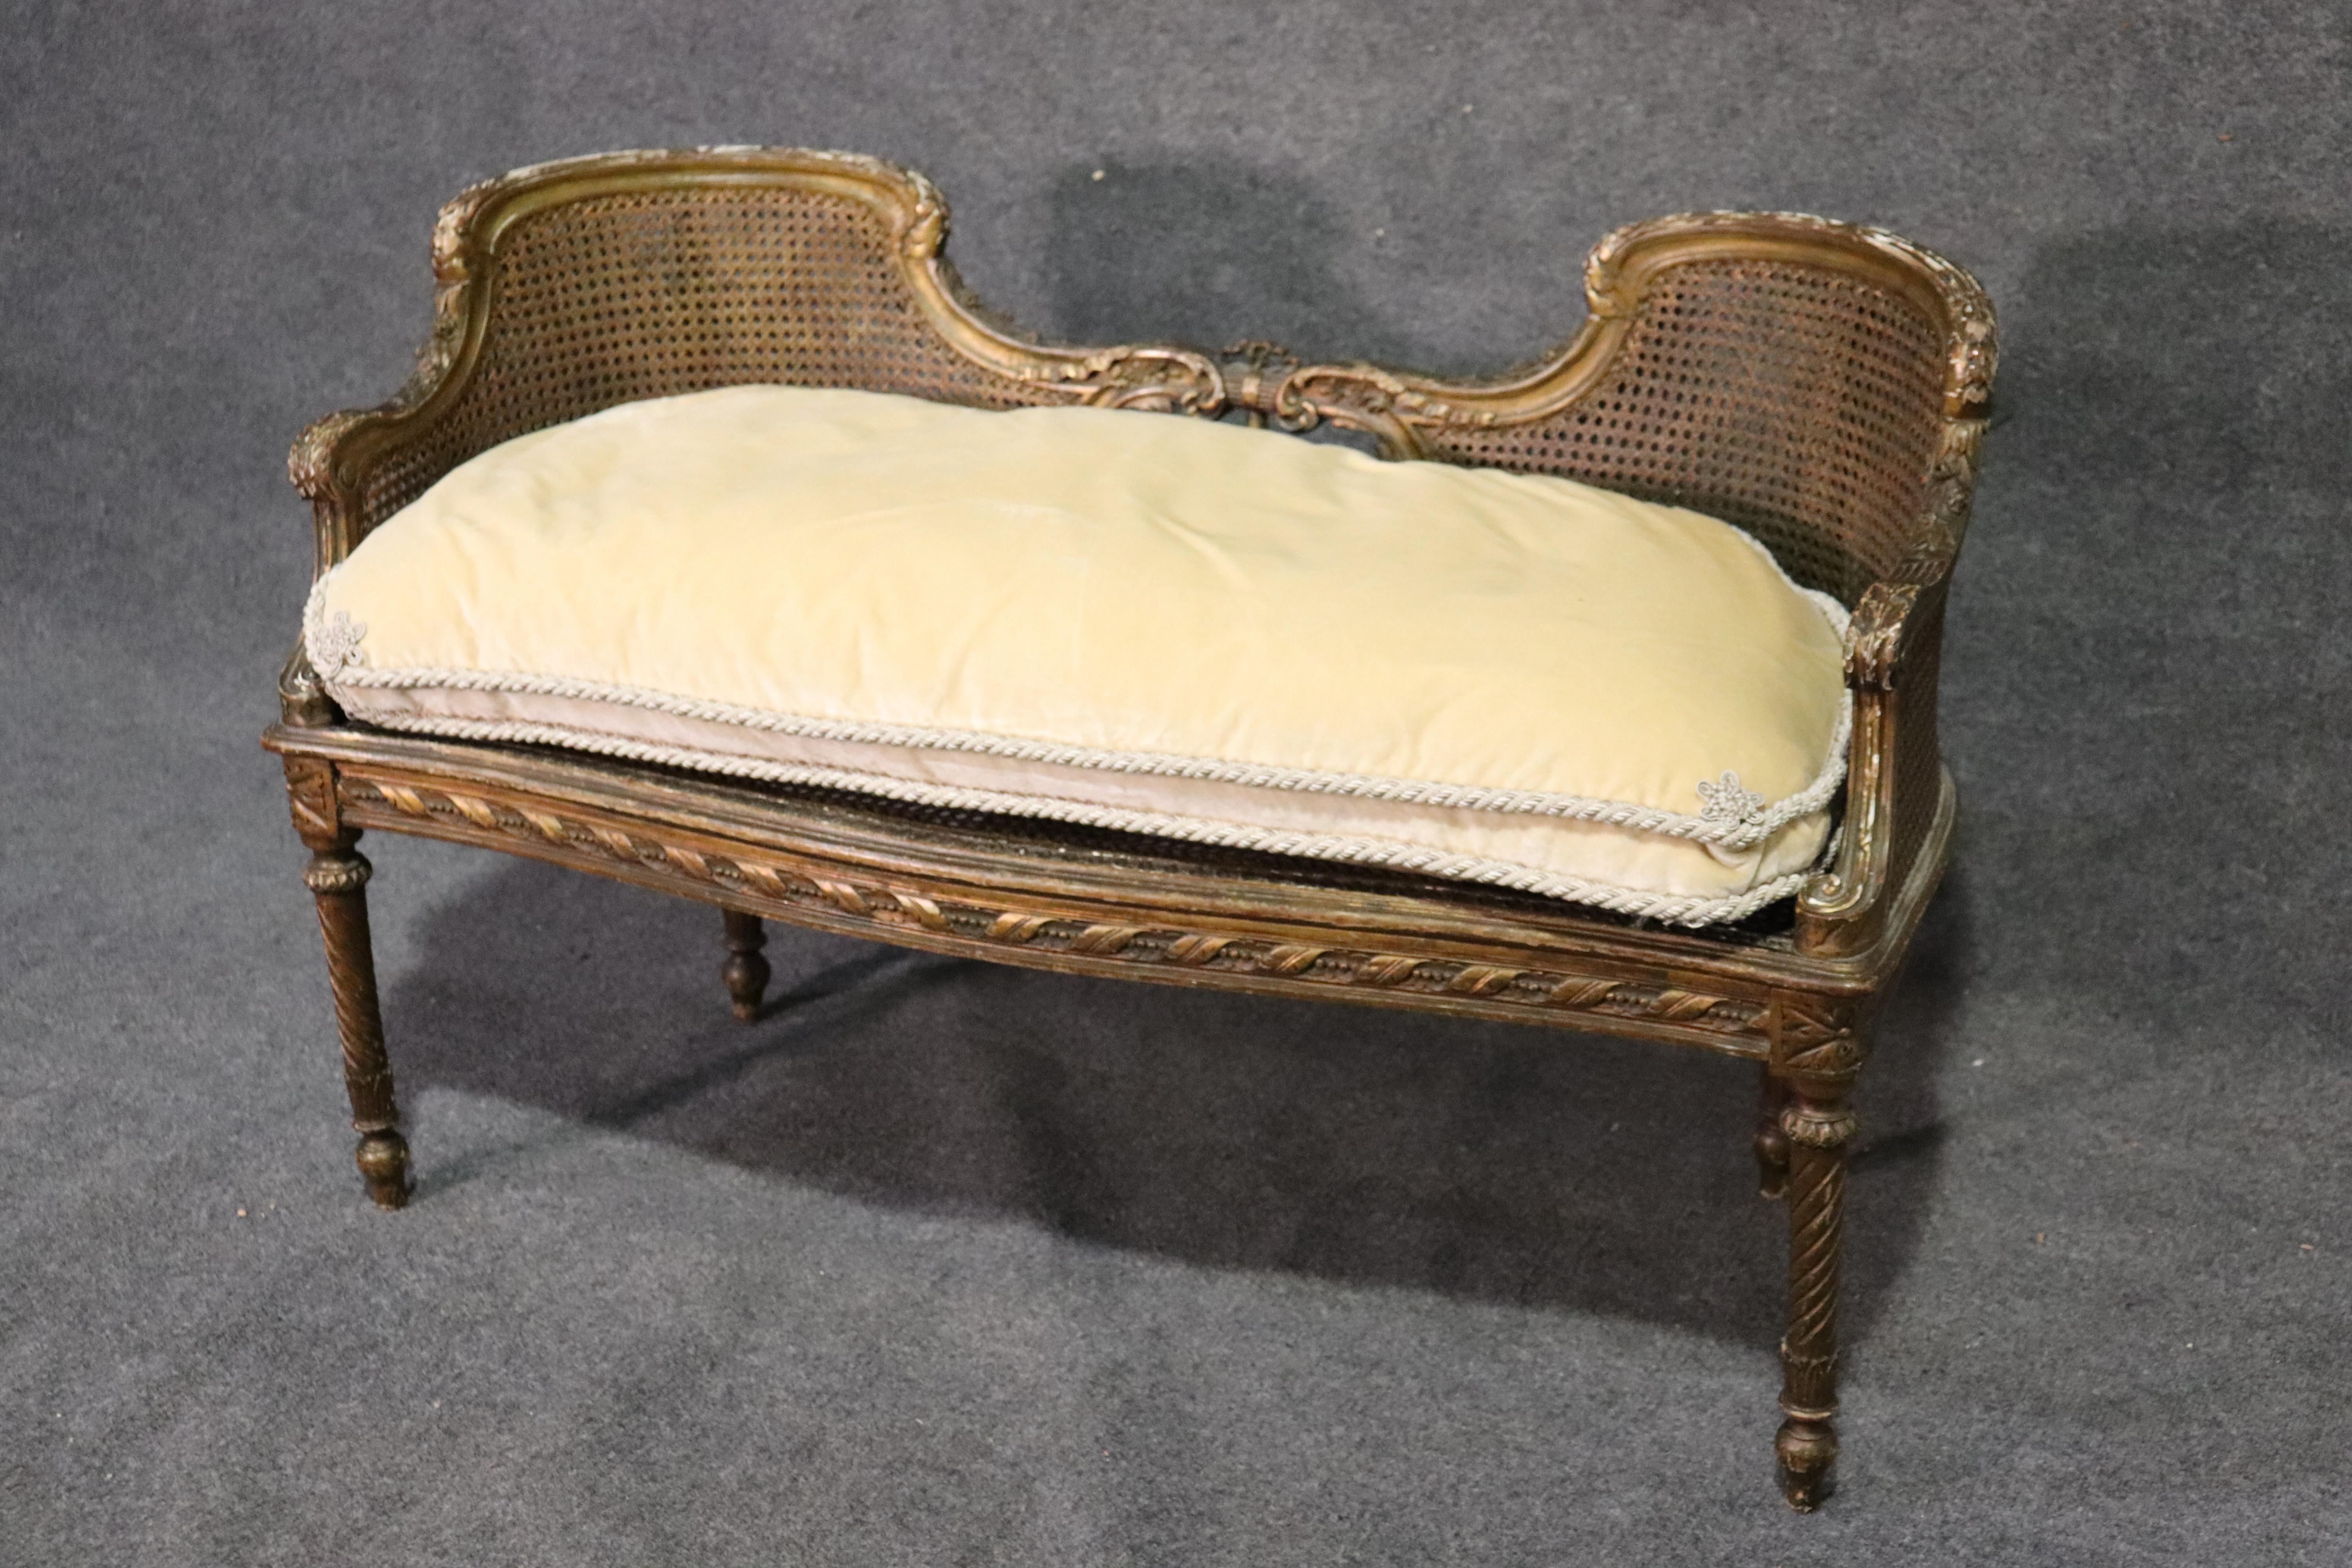 This is a gorgeous cane window bench that features a fine old genuine gold leaf surface and beautiful design and carved detail. The bench measures 45 wide x 21 deep x 29 tall and the seat height is 16 inches.